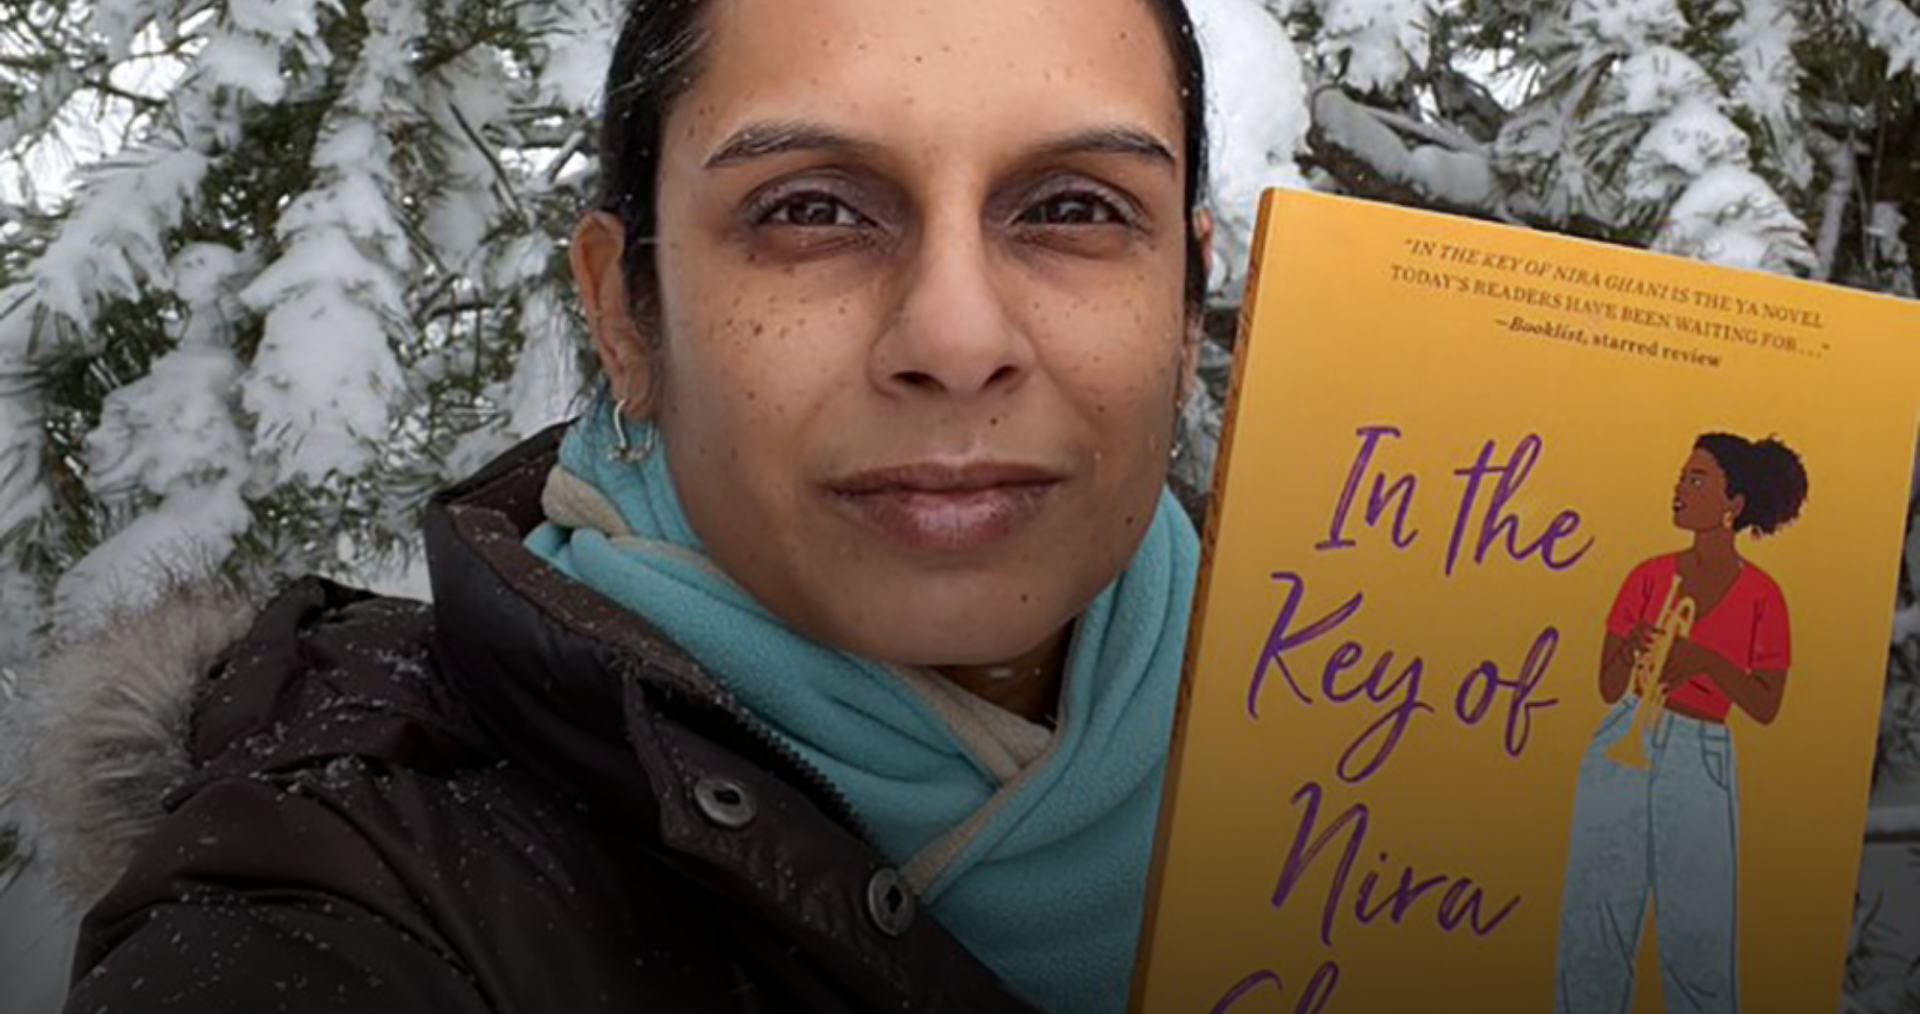 Natasha Deen, author, holding up her book In the Key of Nira Ghani